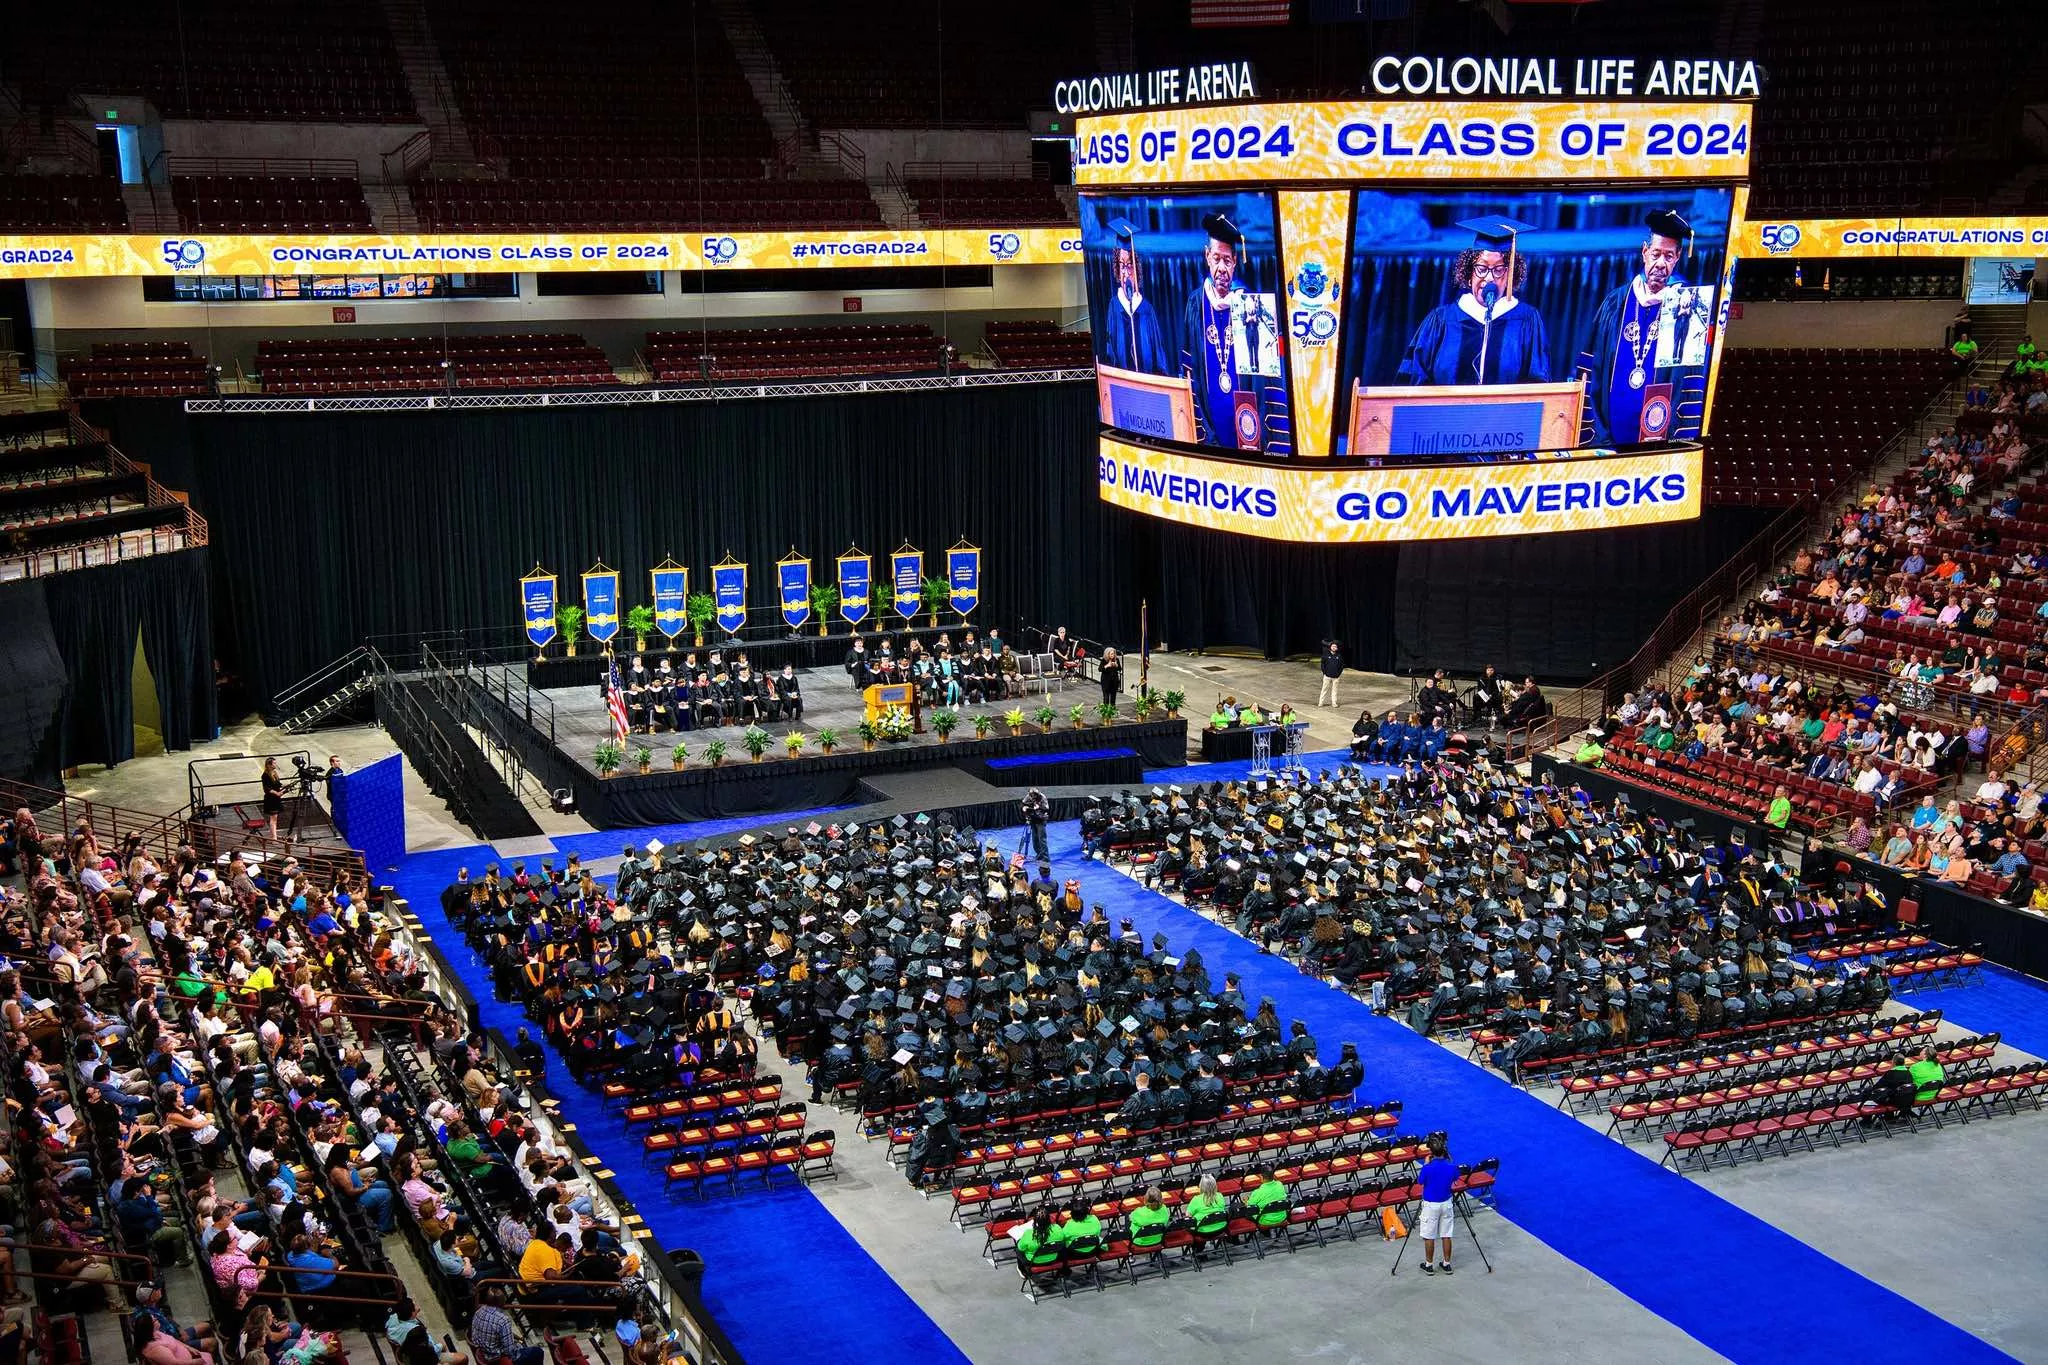 Spring Commencement at Colonial Life Arena